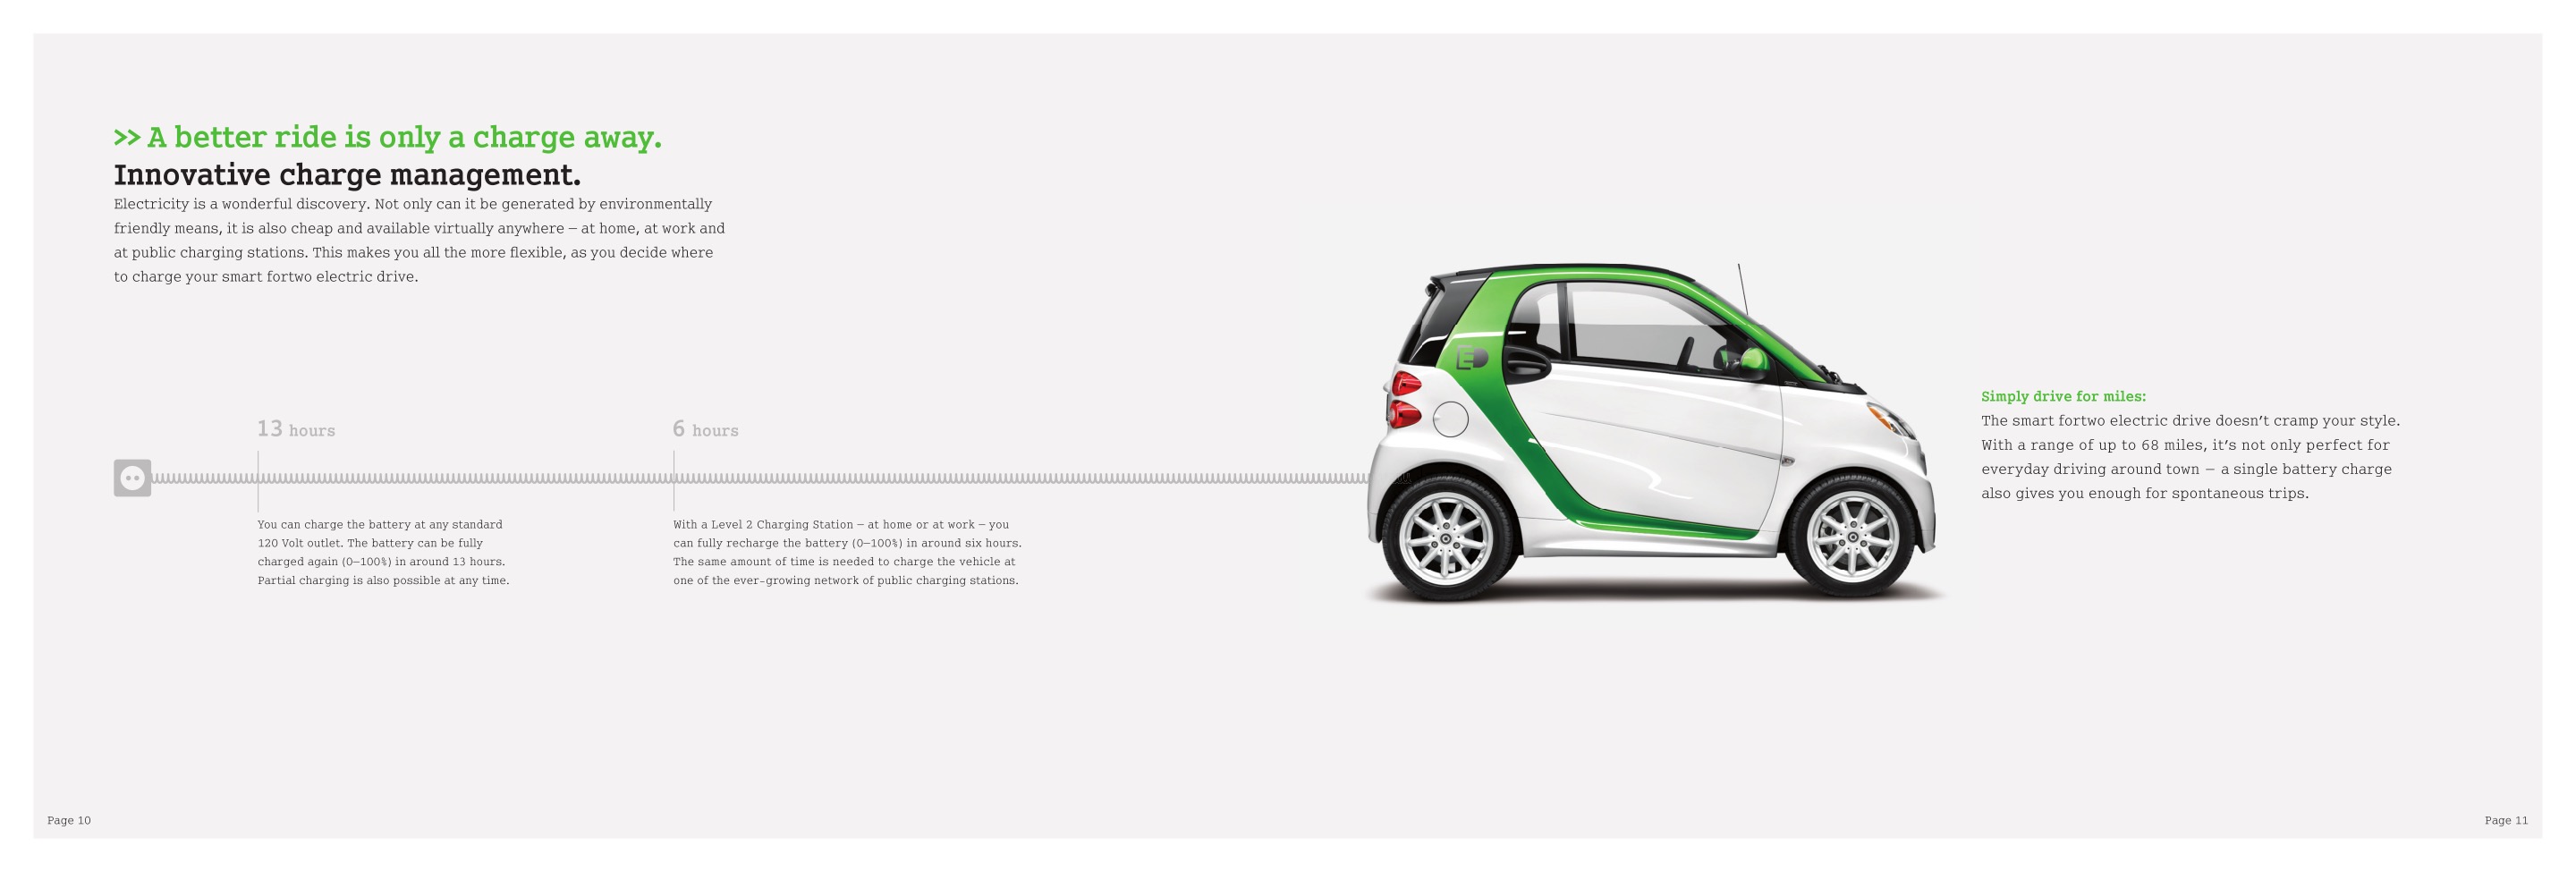 2015 Smart Fortwo Electric Brochure Page 17